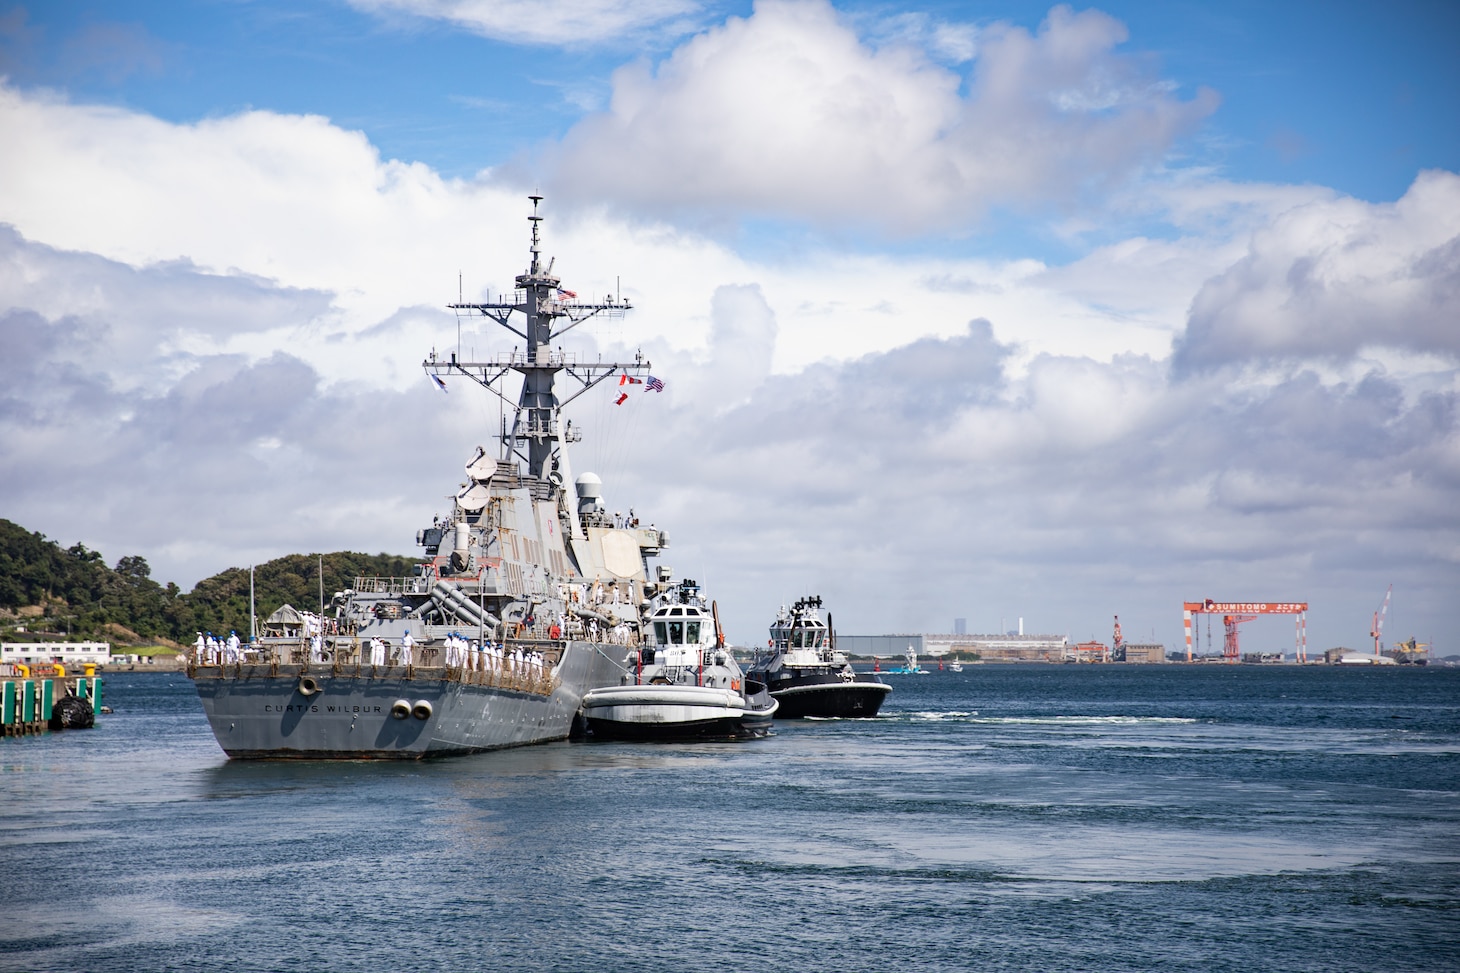 YOKOSUKA, Japan (Aug. 18, 2021) Arleigh Burke-class guided-missile destroyer USS Curtis Wilbur (DDG 54) departs Fleet Activities Yokosuka, Japan, August 18, following 25 years of service as a forward-deployed ship to U.S. 7th Fleet. Curtis Wilbur is scheduled to join U.S. 3rd Fleet, which leads naval forces in the Indo-Pacific and provides the realistic, relevant training necessary for an effective global Navy.